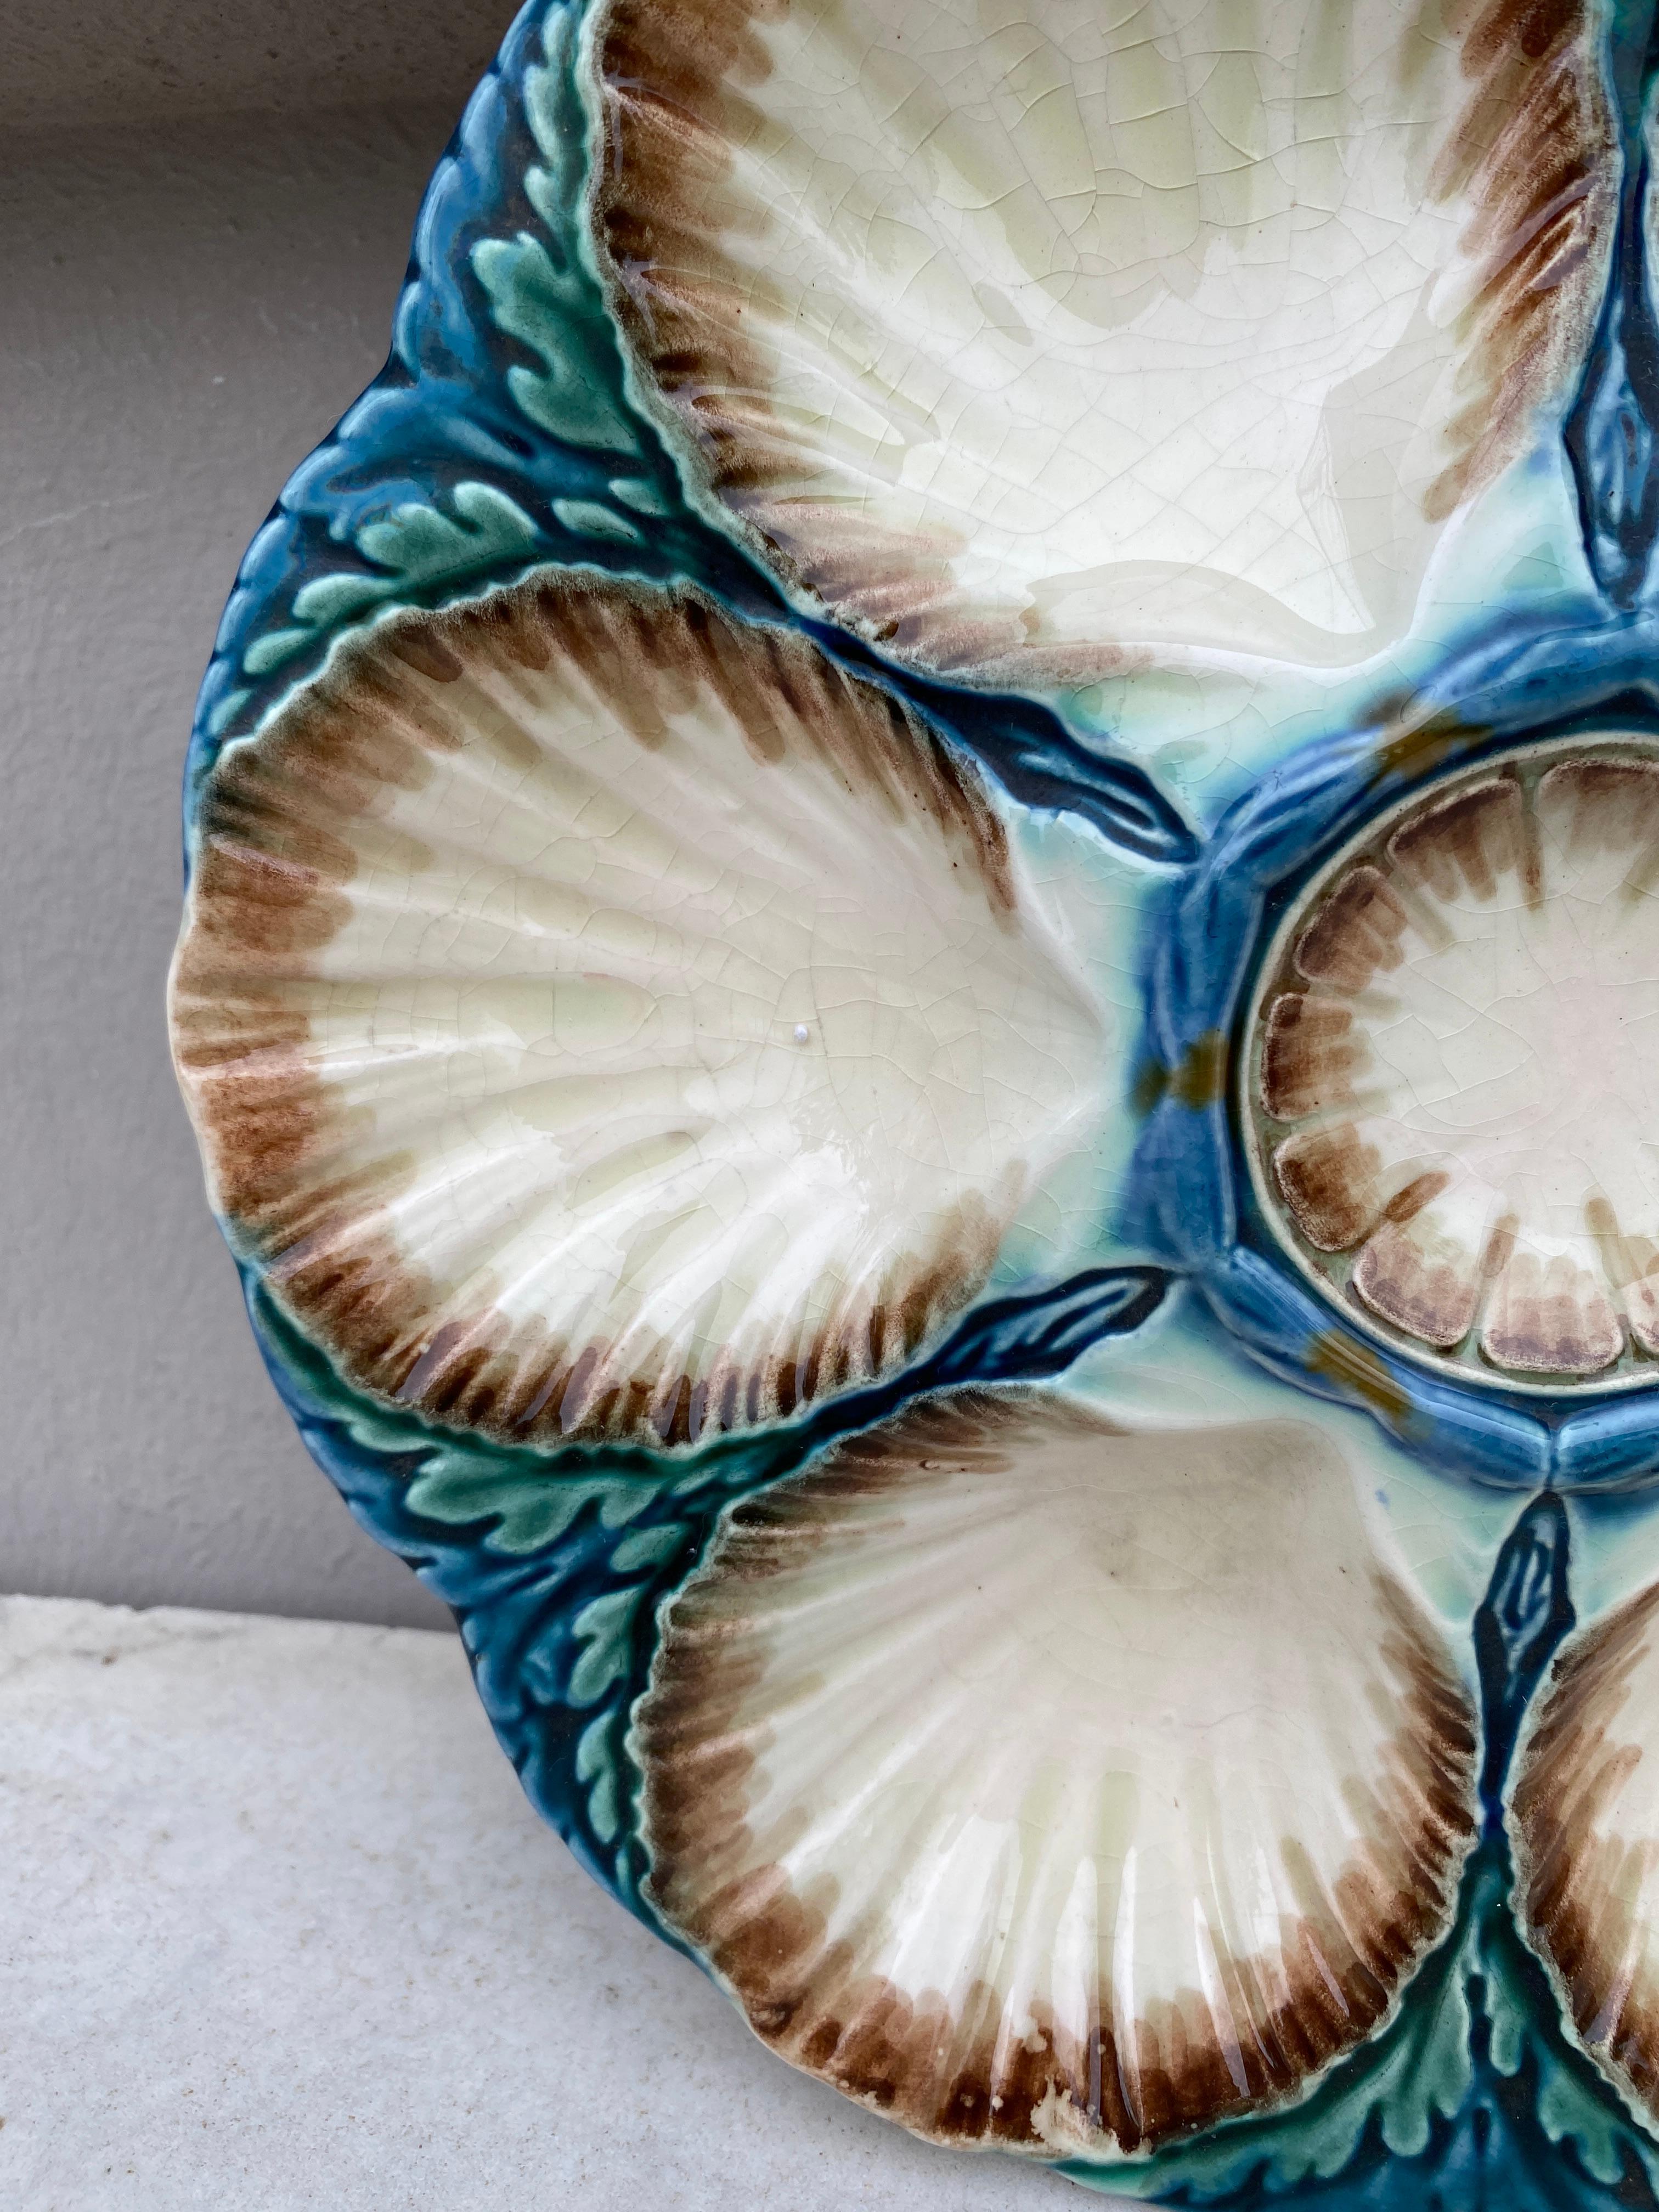 Majolica oyster plate Sarreguemines, circa 1870.
6 Shells and space for the lemon on the center.
Older model.